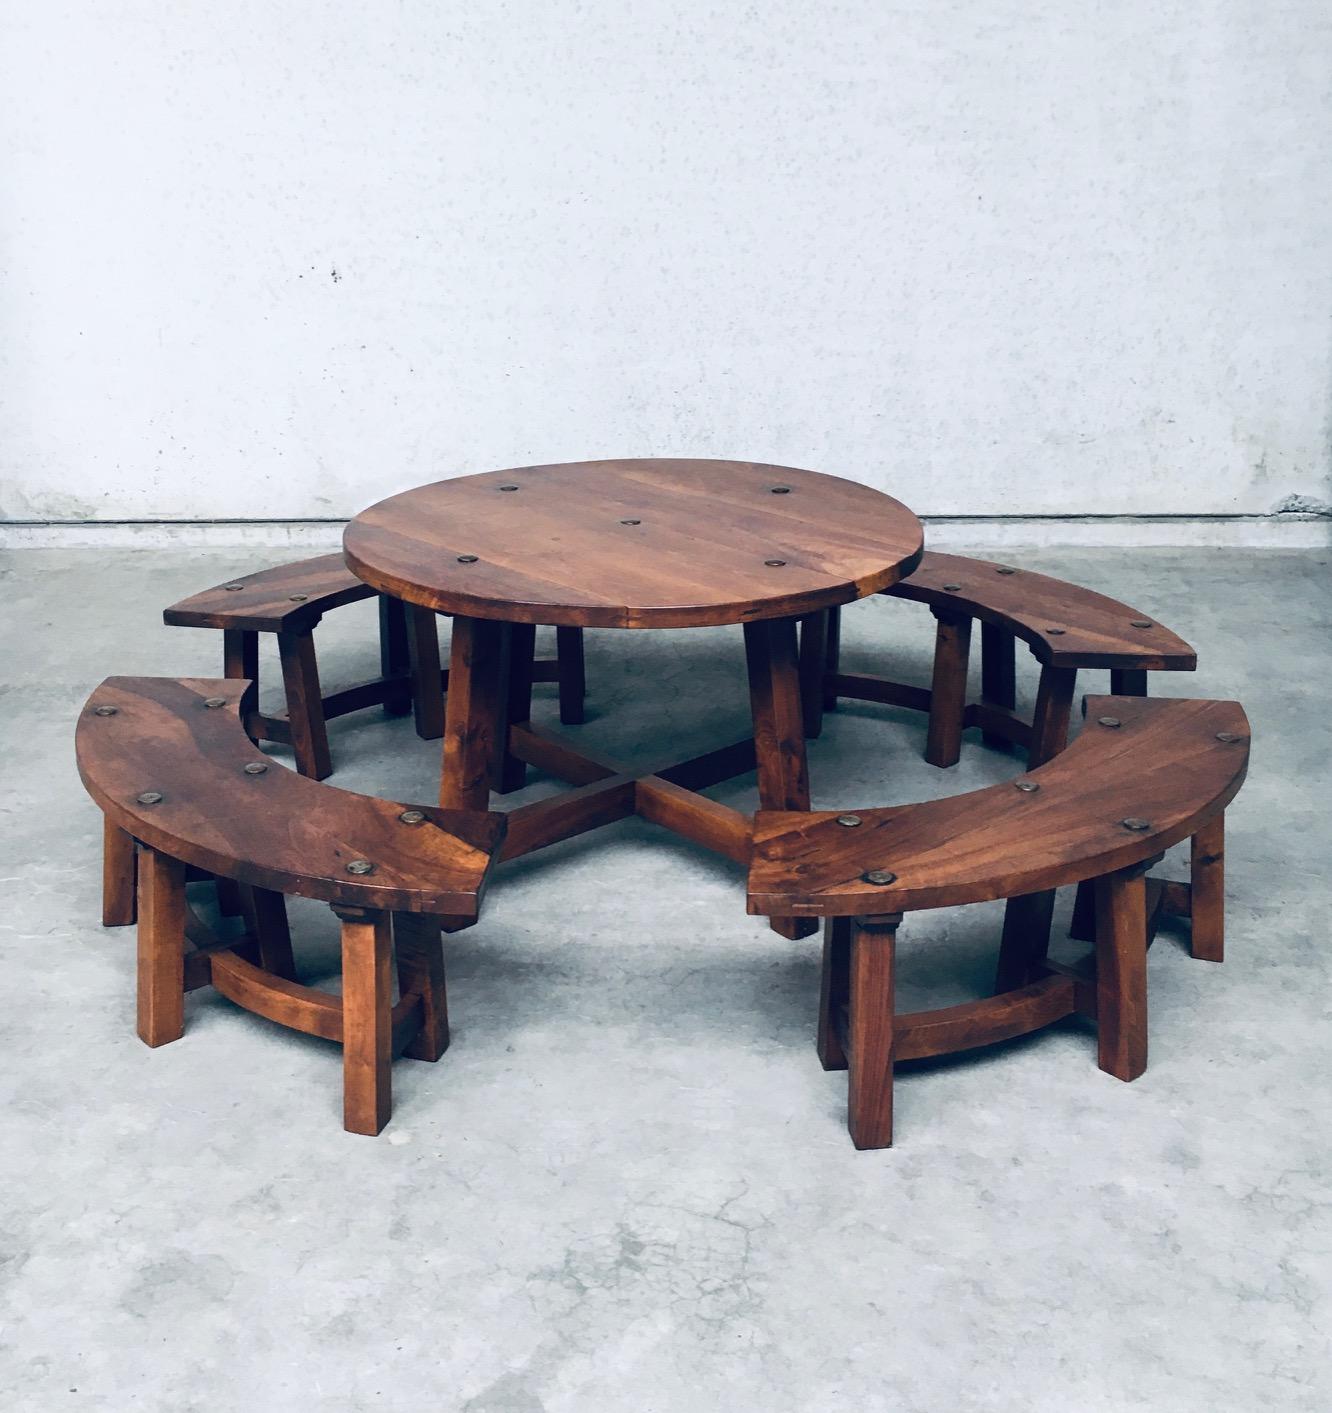 Ash Midcentury French Alps Chalet Style Round Table & 4 Benches, France 1950's